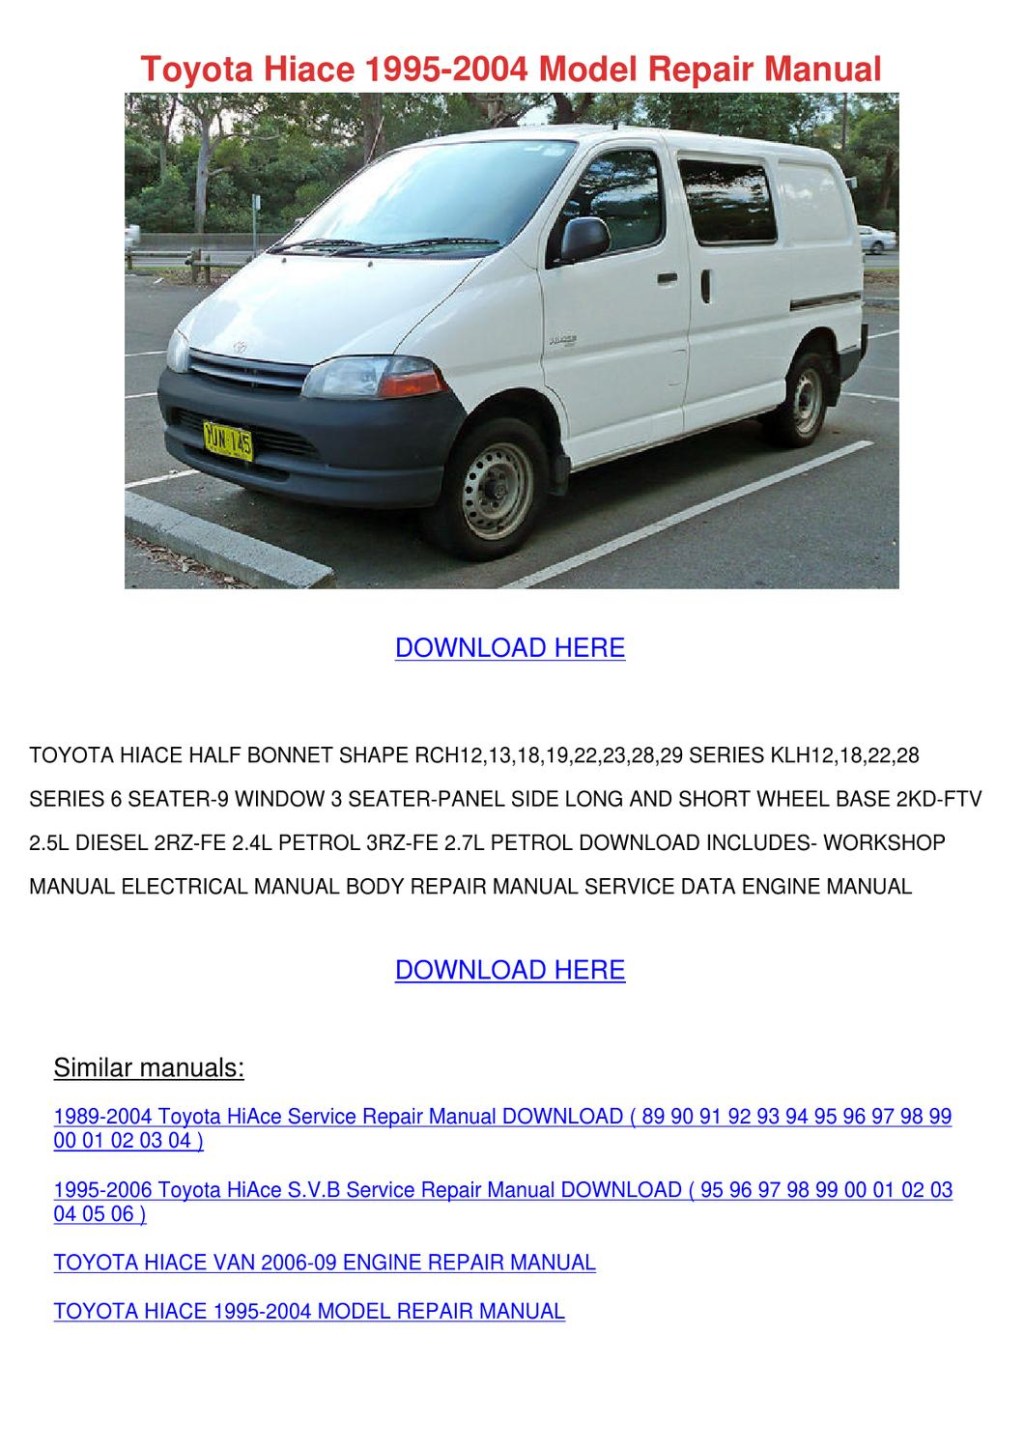 Picture of: Toyota Hiace   Model Repair Manual by Sharee Timoteo – Issuu